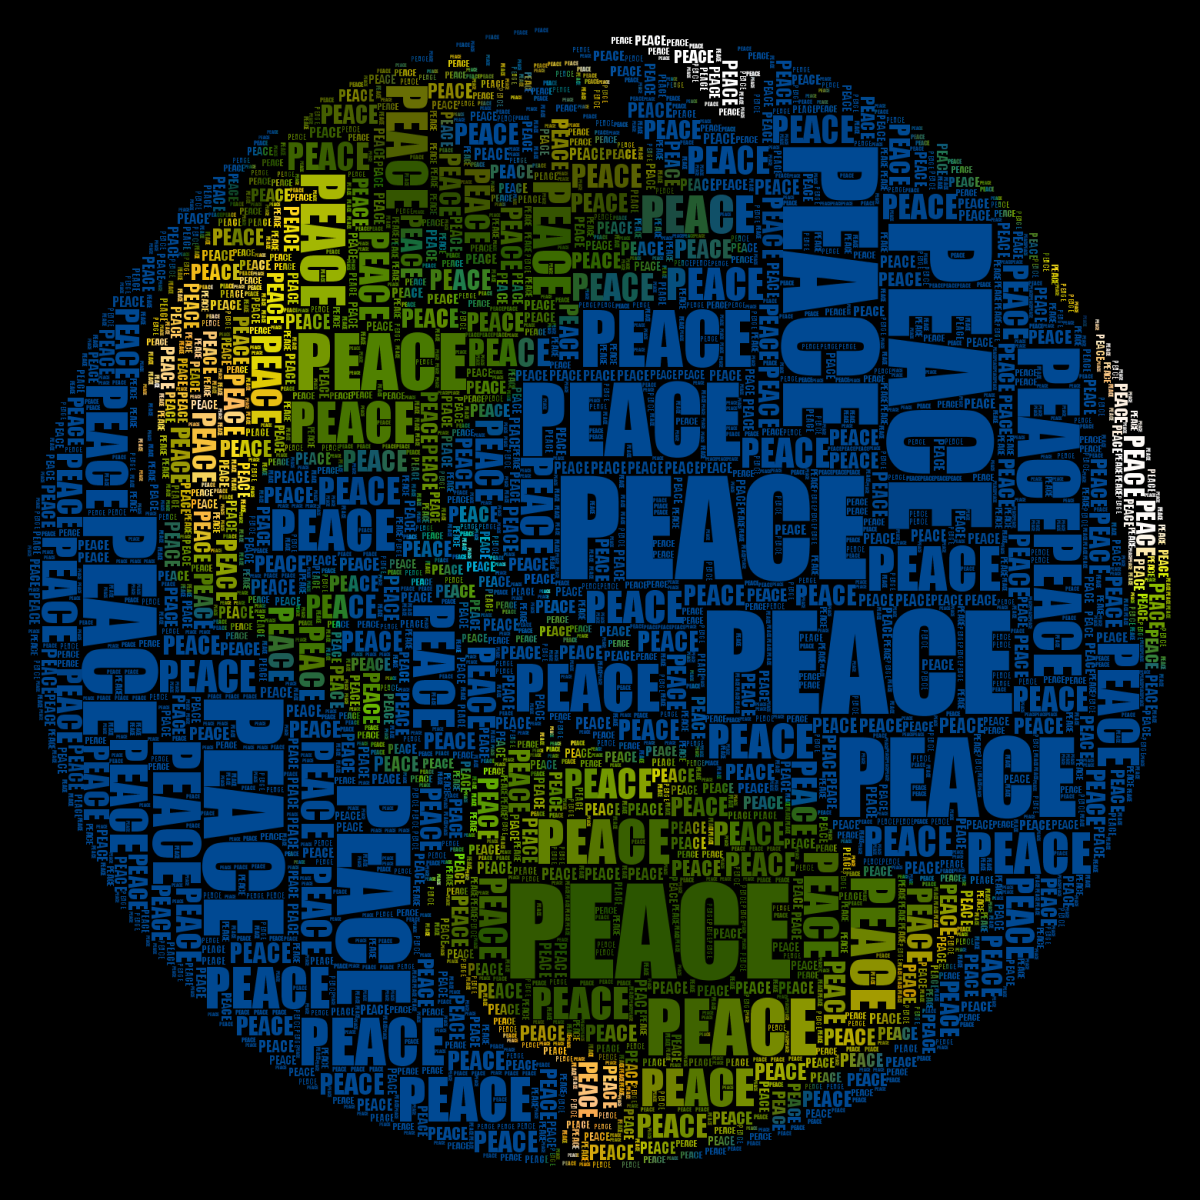 more-than-ever-we-need-peace-to-sit-on-the-throne-of-humanity-if-we-are-going-to-save-this-planet